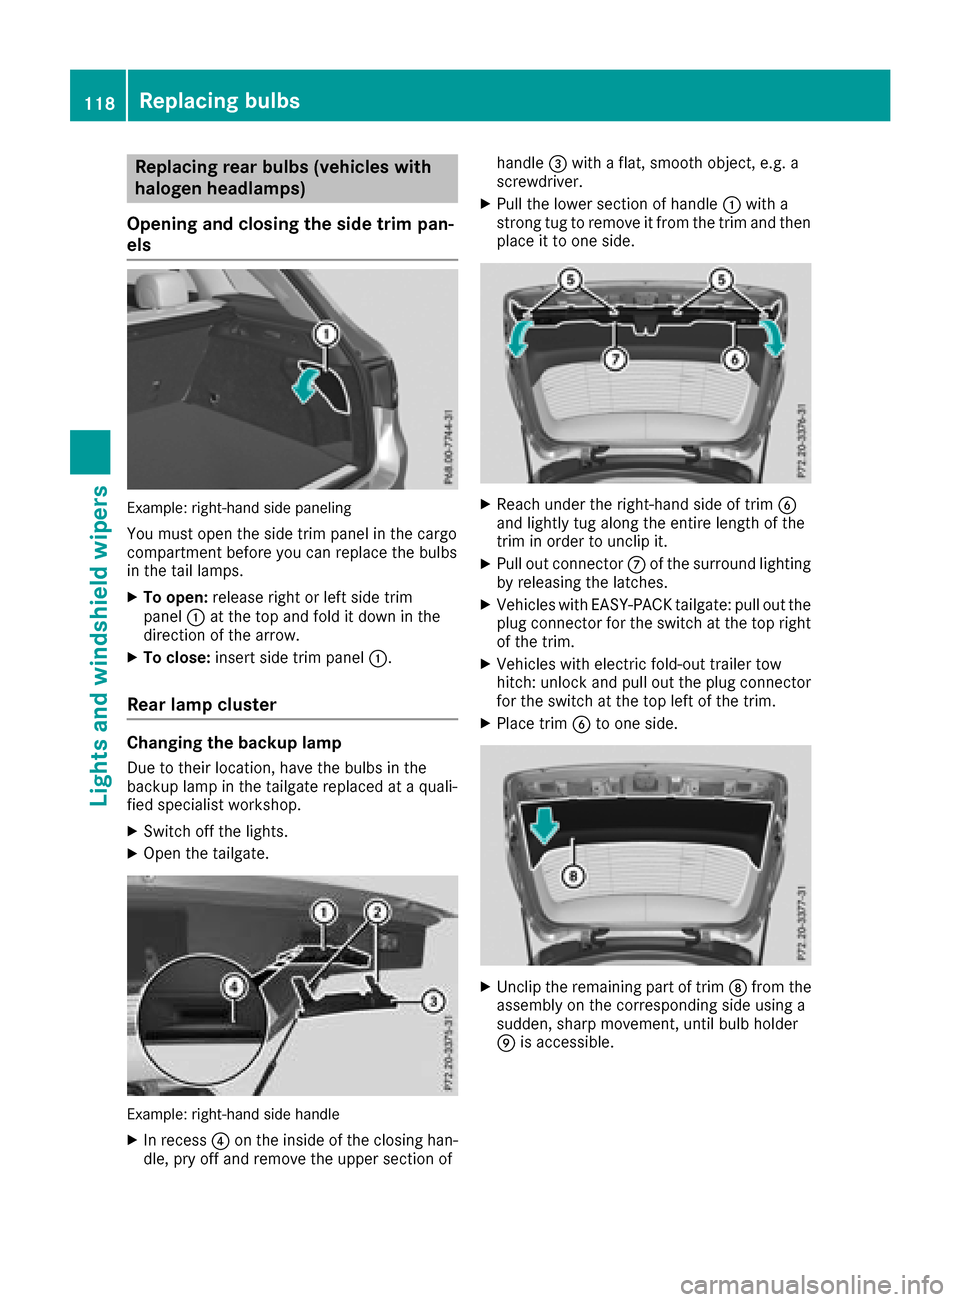 MERCEDES-BENZ GLC SUV 2017 X253 User Guide Replacing rear bulbs (vehicles with
halogen headlamps)
Opening and closing the side trim pan-
els
Example: right-hand side paneling
You must open the side trim panel in the cargo
compartment before yo